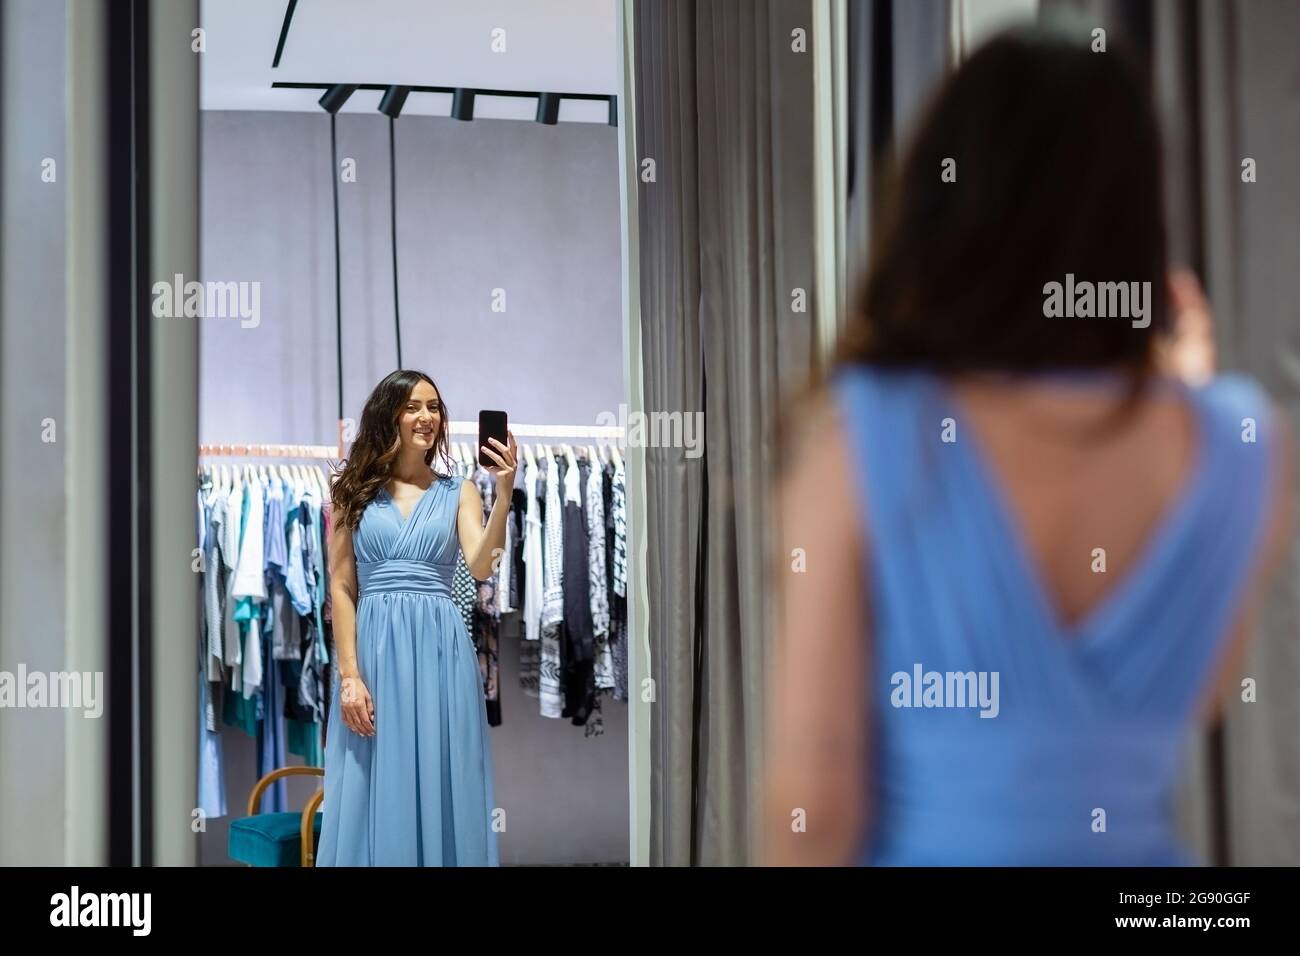 Young woman photographing self in mirror wearing blue dress at boutique Stock Photo